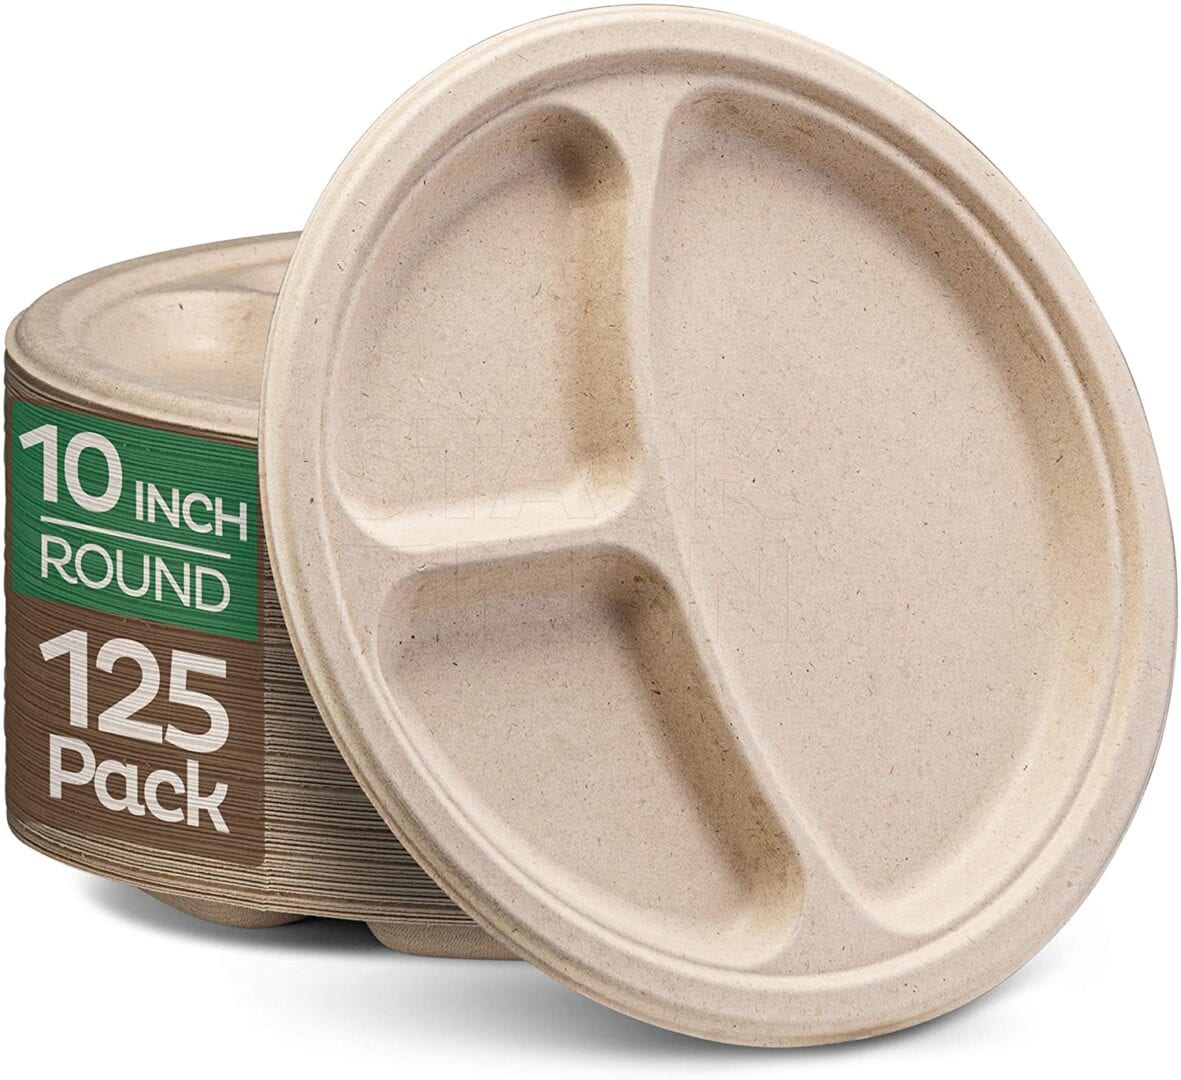 100% Compostable Clamshell Take Out Food Containers [6x6 50-Pack]  Heavy-Duty Quality to go Containers, Natural Disposable Bagasse, Eco-Friendly  Biodegradable Made of Sugar Cane Fibers - A World Of Deals